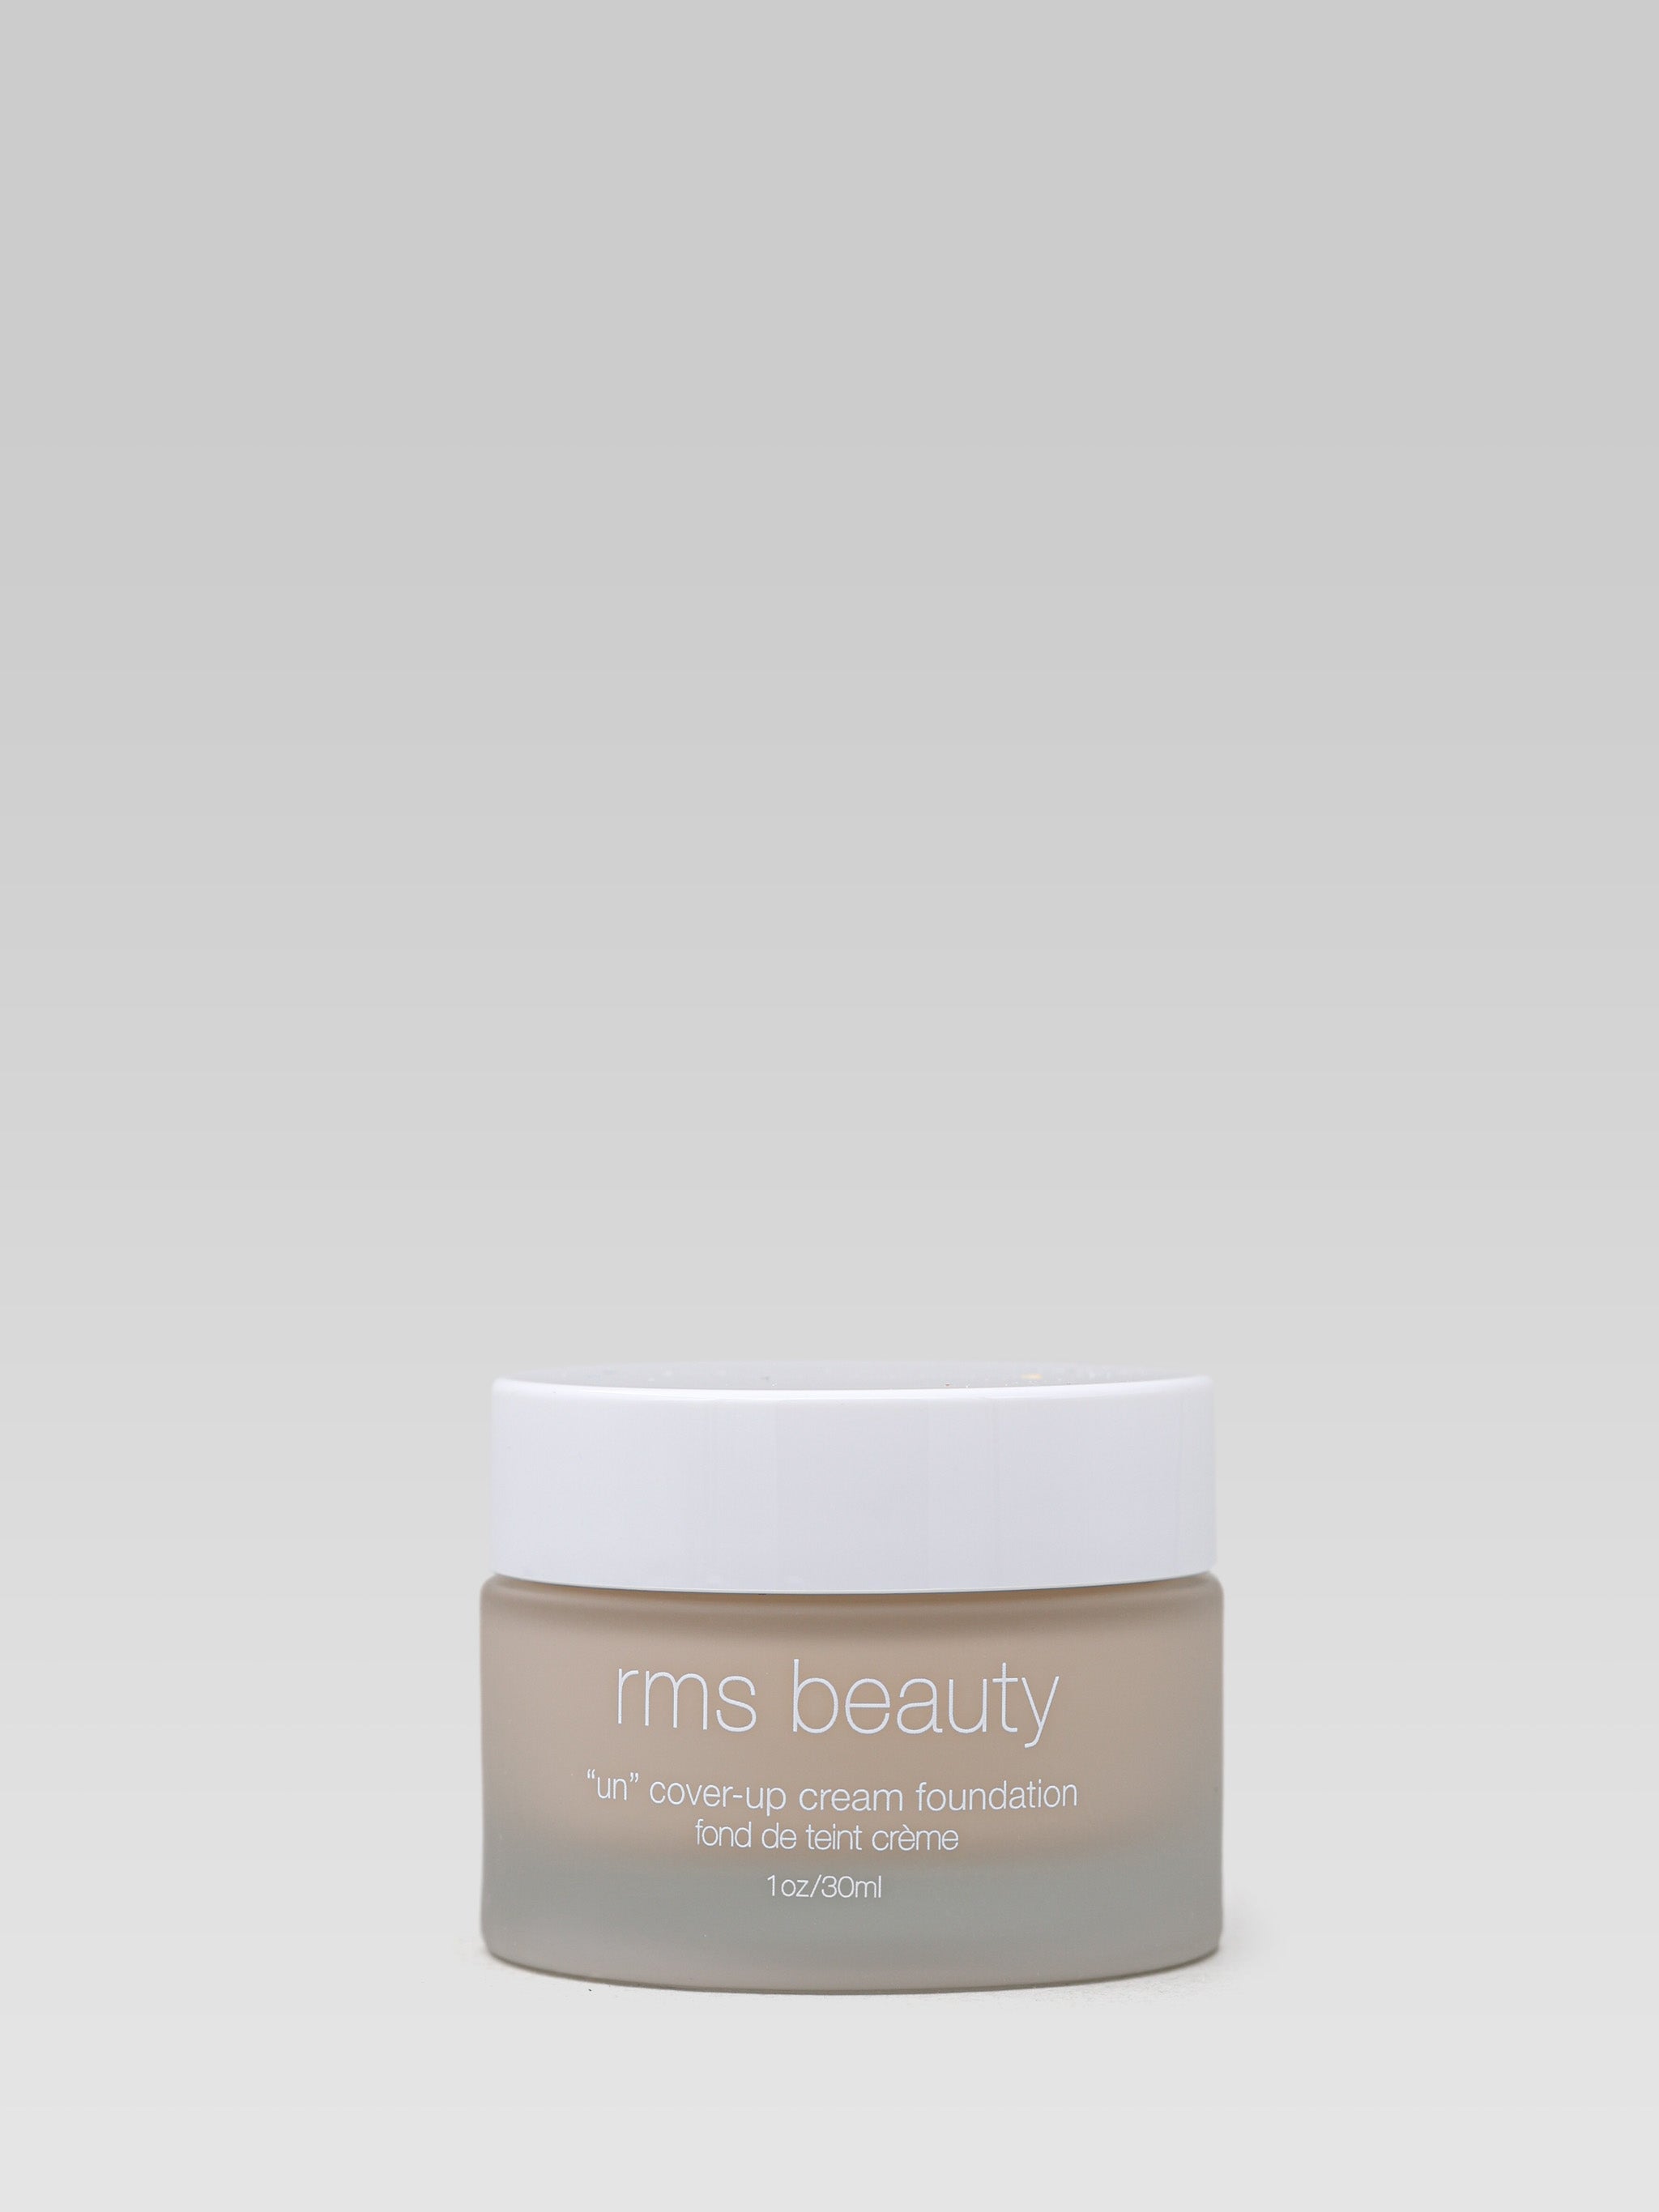 RMS Beauty un cover up cream foundation product photo